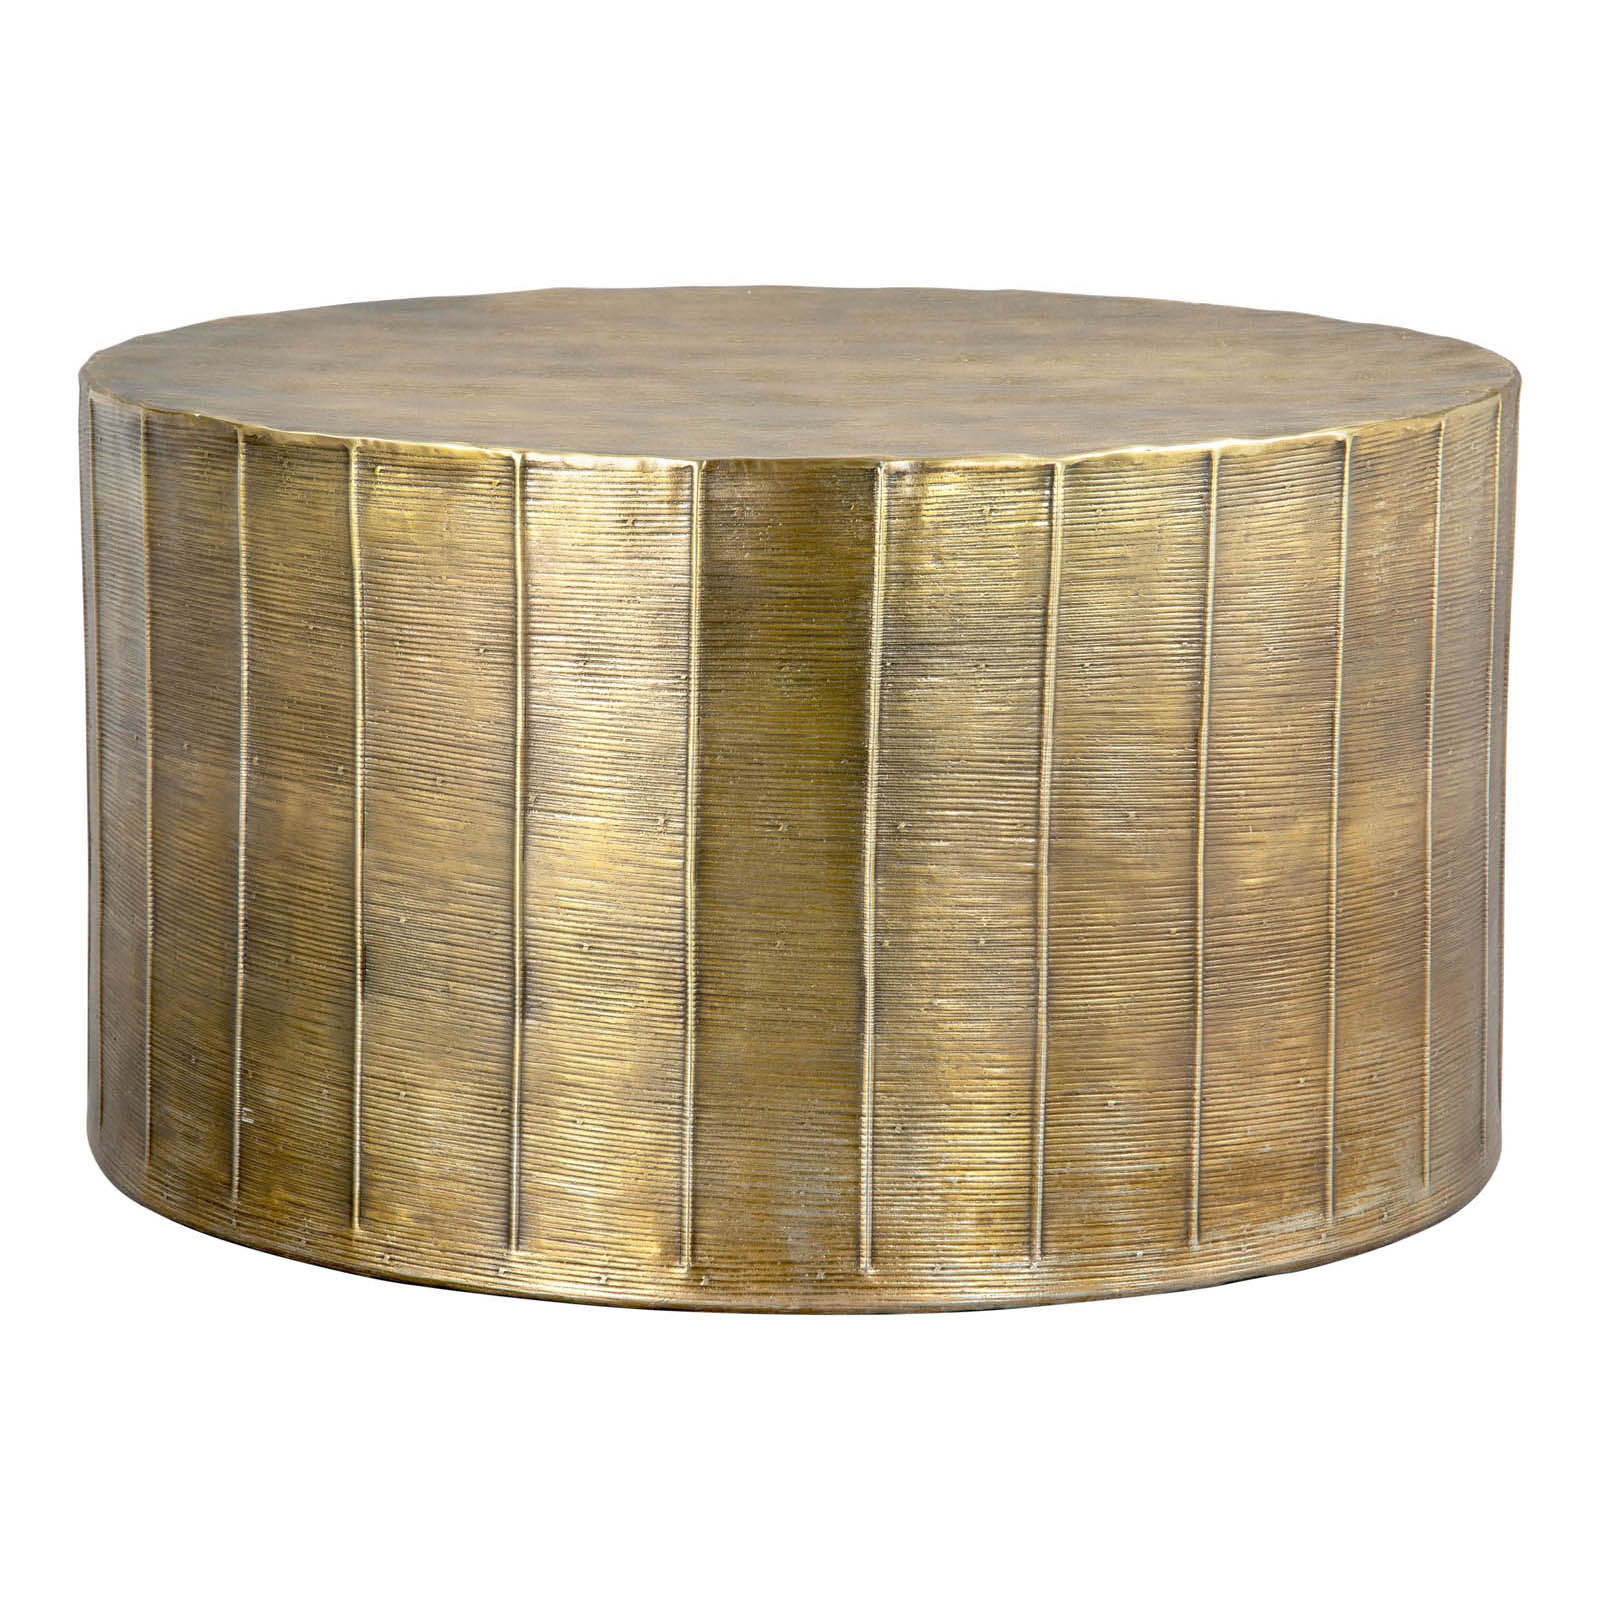 Chris Coffee Table in Antique Brass